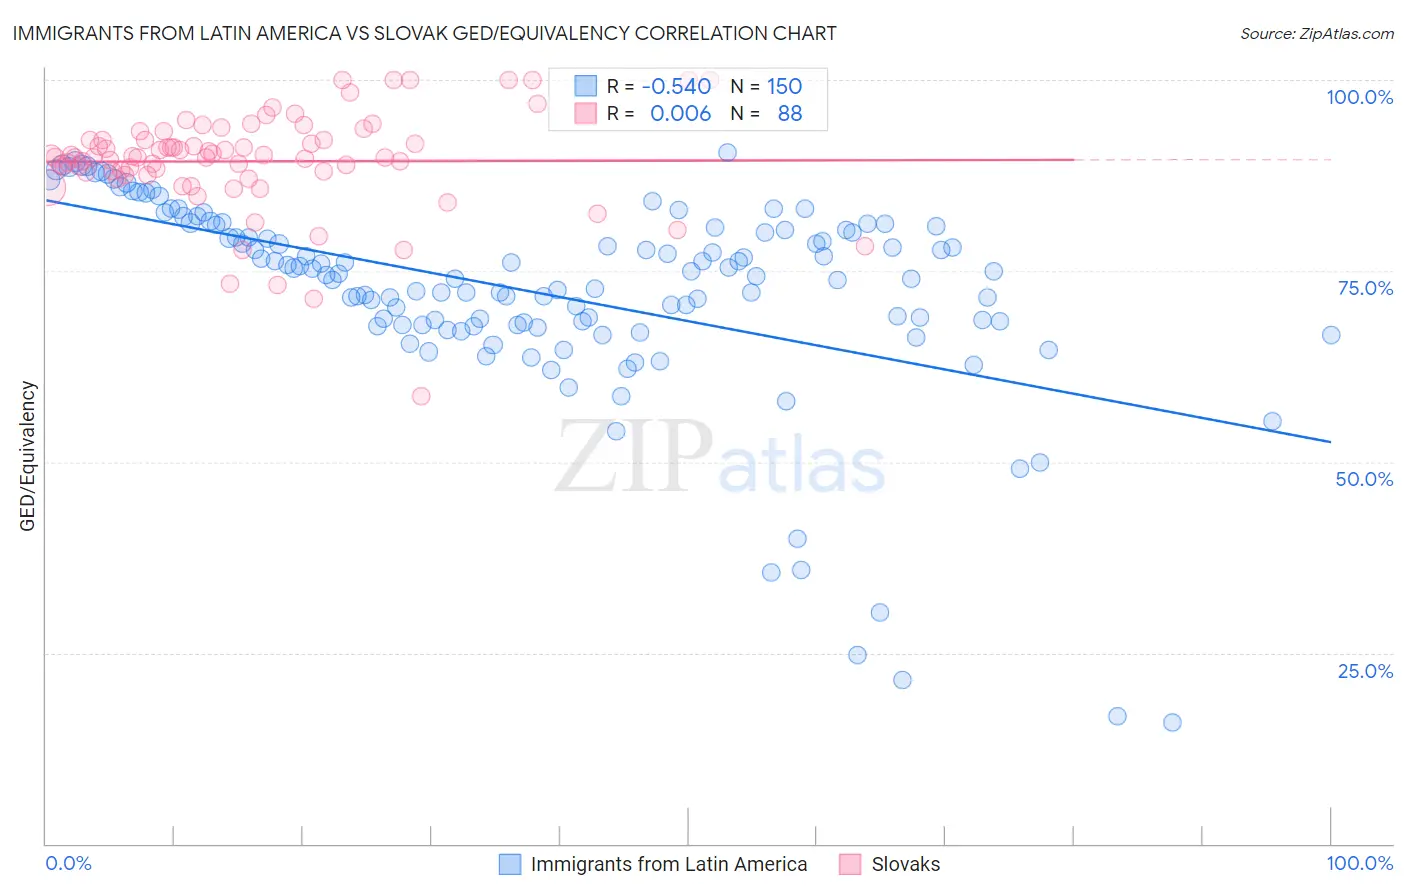 Immigrants from Latin America vs Slovak GED/Equivalency